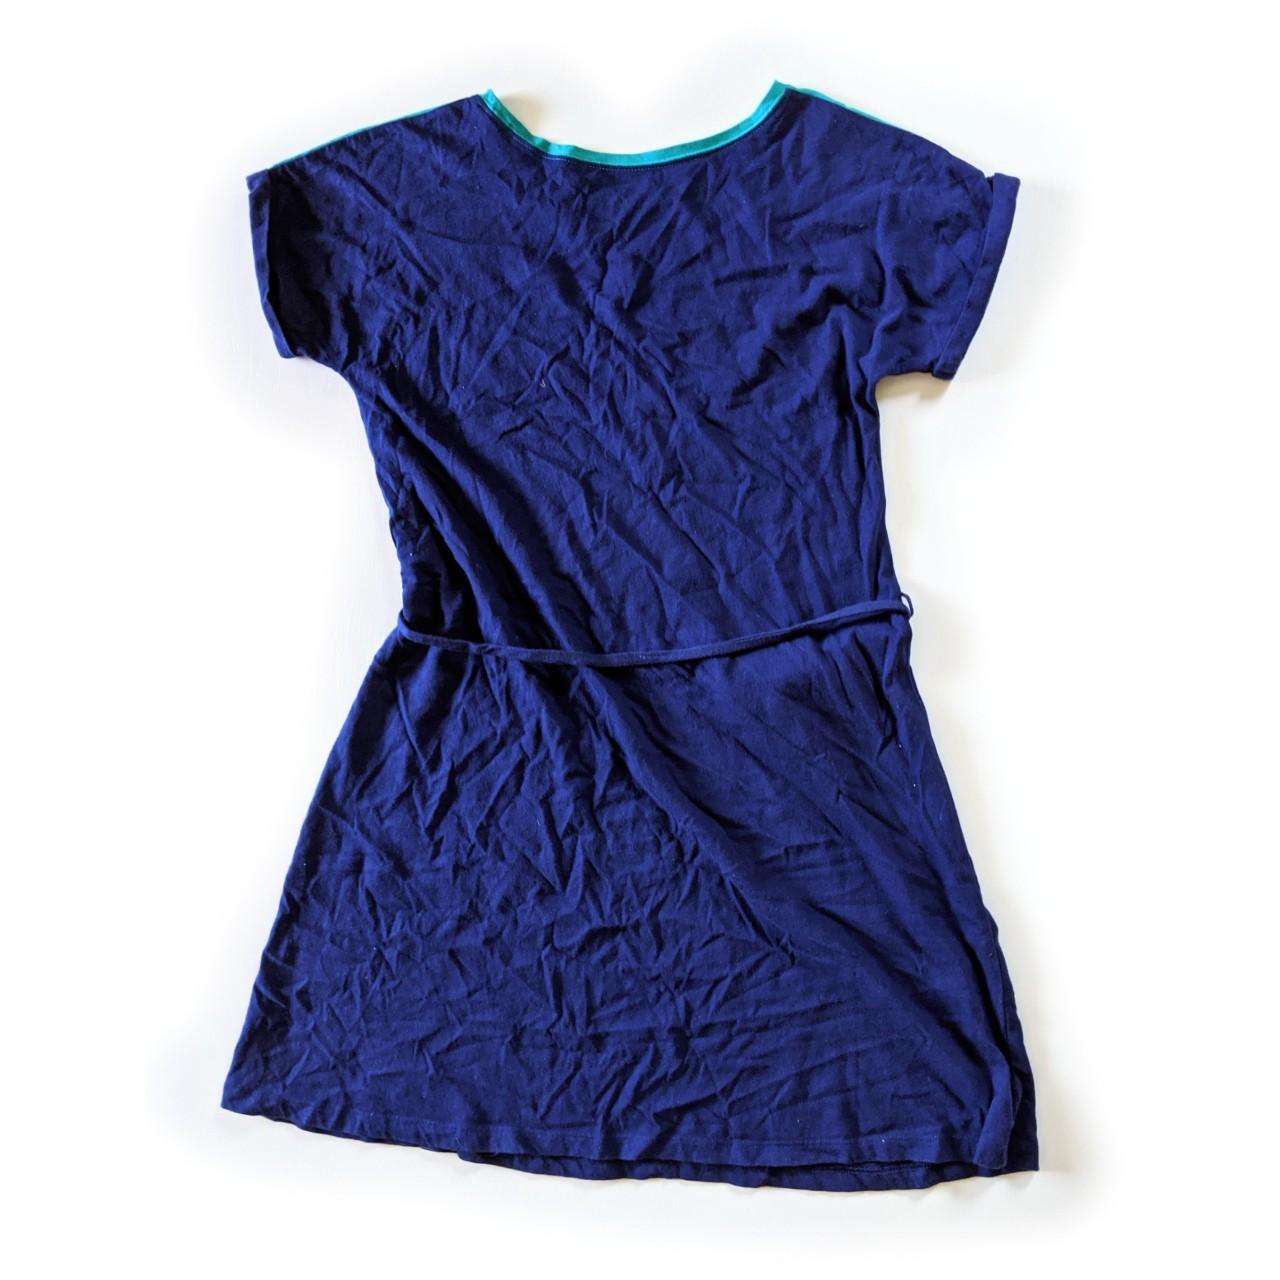 Product Image 3 - Blue Color Block Dress!

Turquoise across